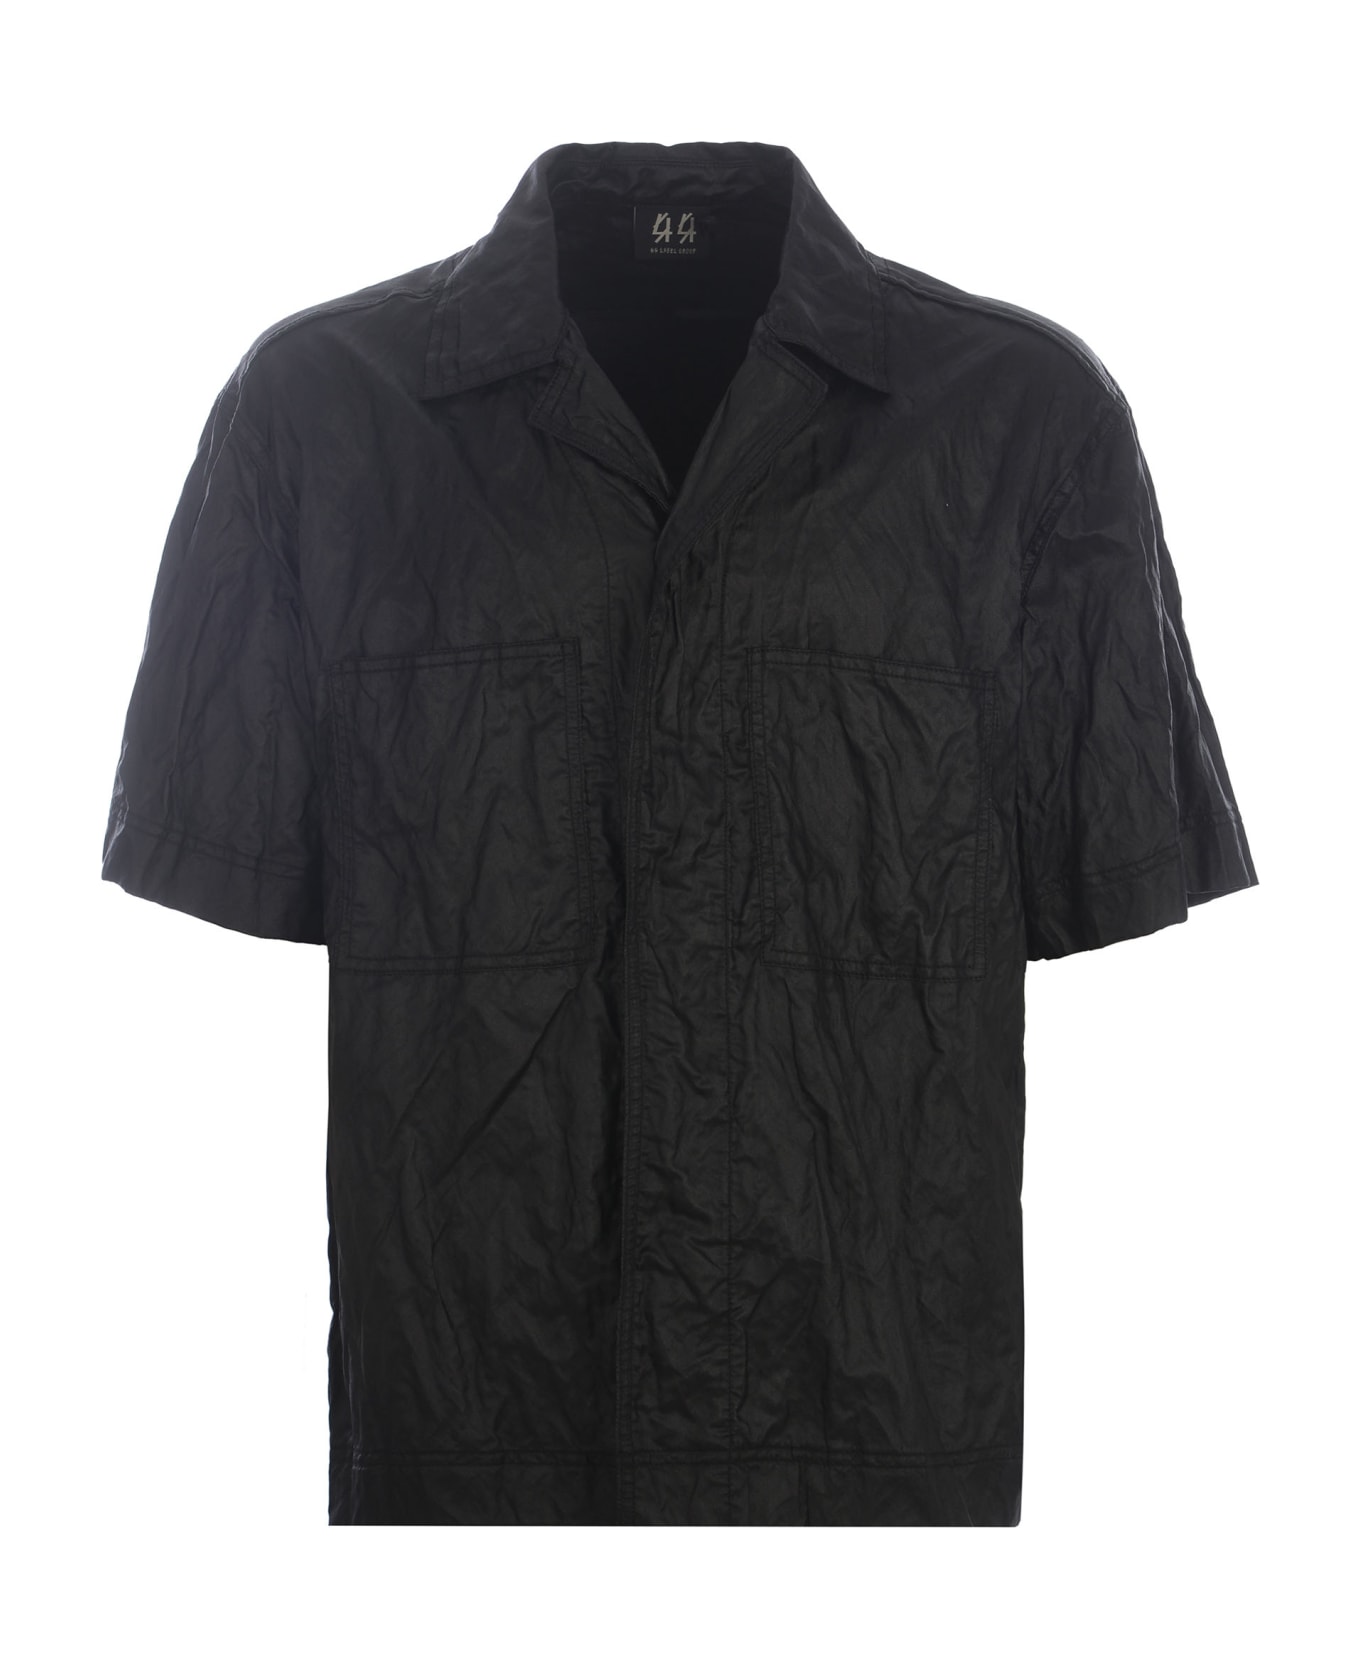 44 Label Group Bowling Shirt 44label Group Made Of Viscose - Nero